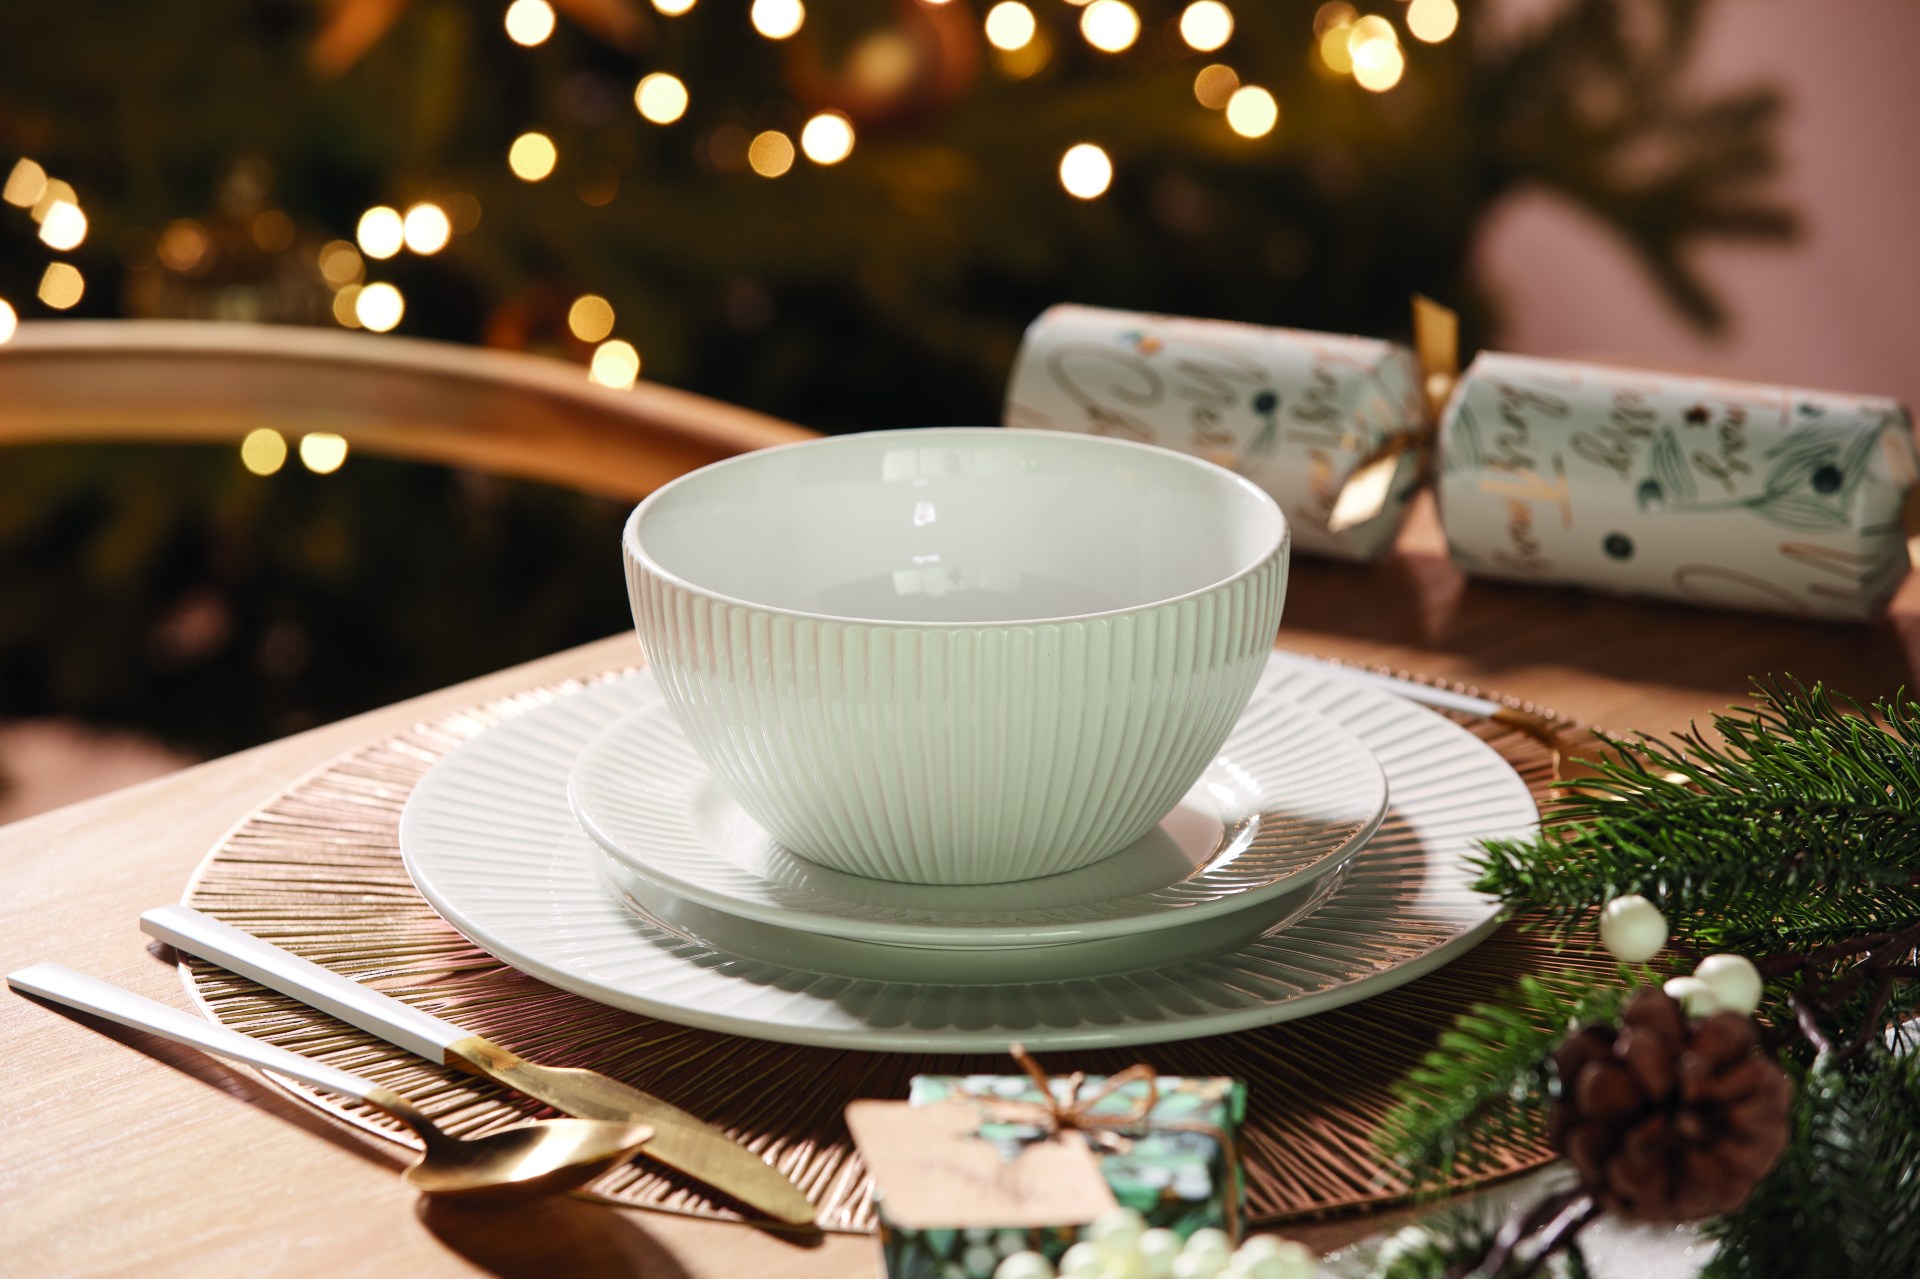 amazon, aldi have launched christmassy dinnerware essentials from £2.99 including plates